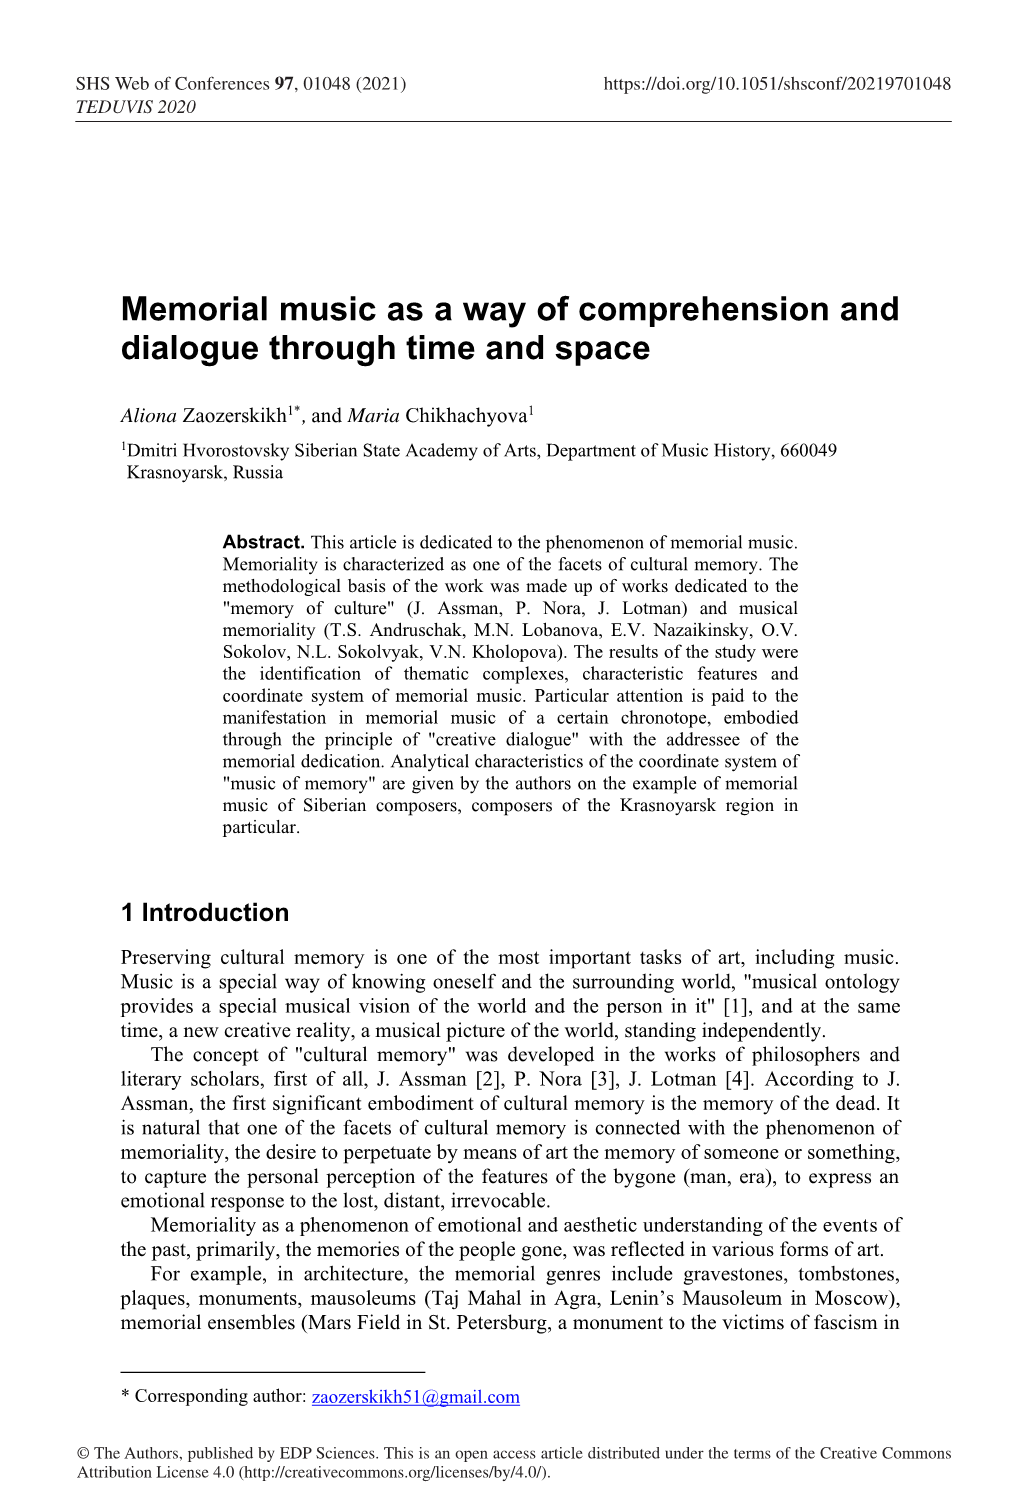 Memorial Music As a Way of Comprehension and Dialogue Through Time and Space